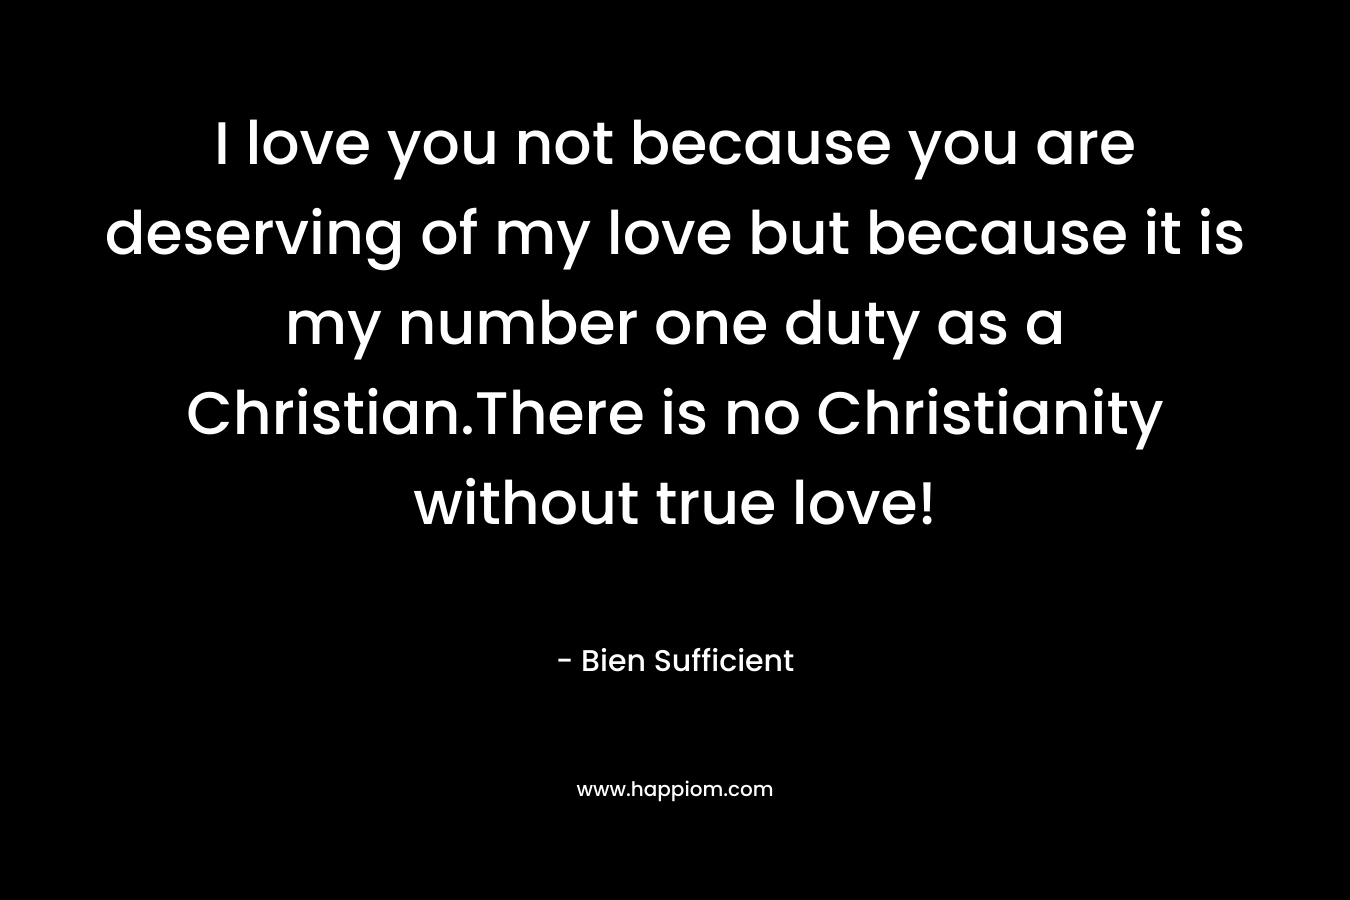 I love you not because you are deserving of my love but because it is my number one duty as a Christian.There is no Christianity without true love! – Bien Sufficient